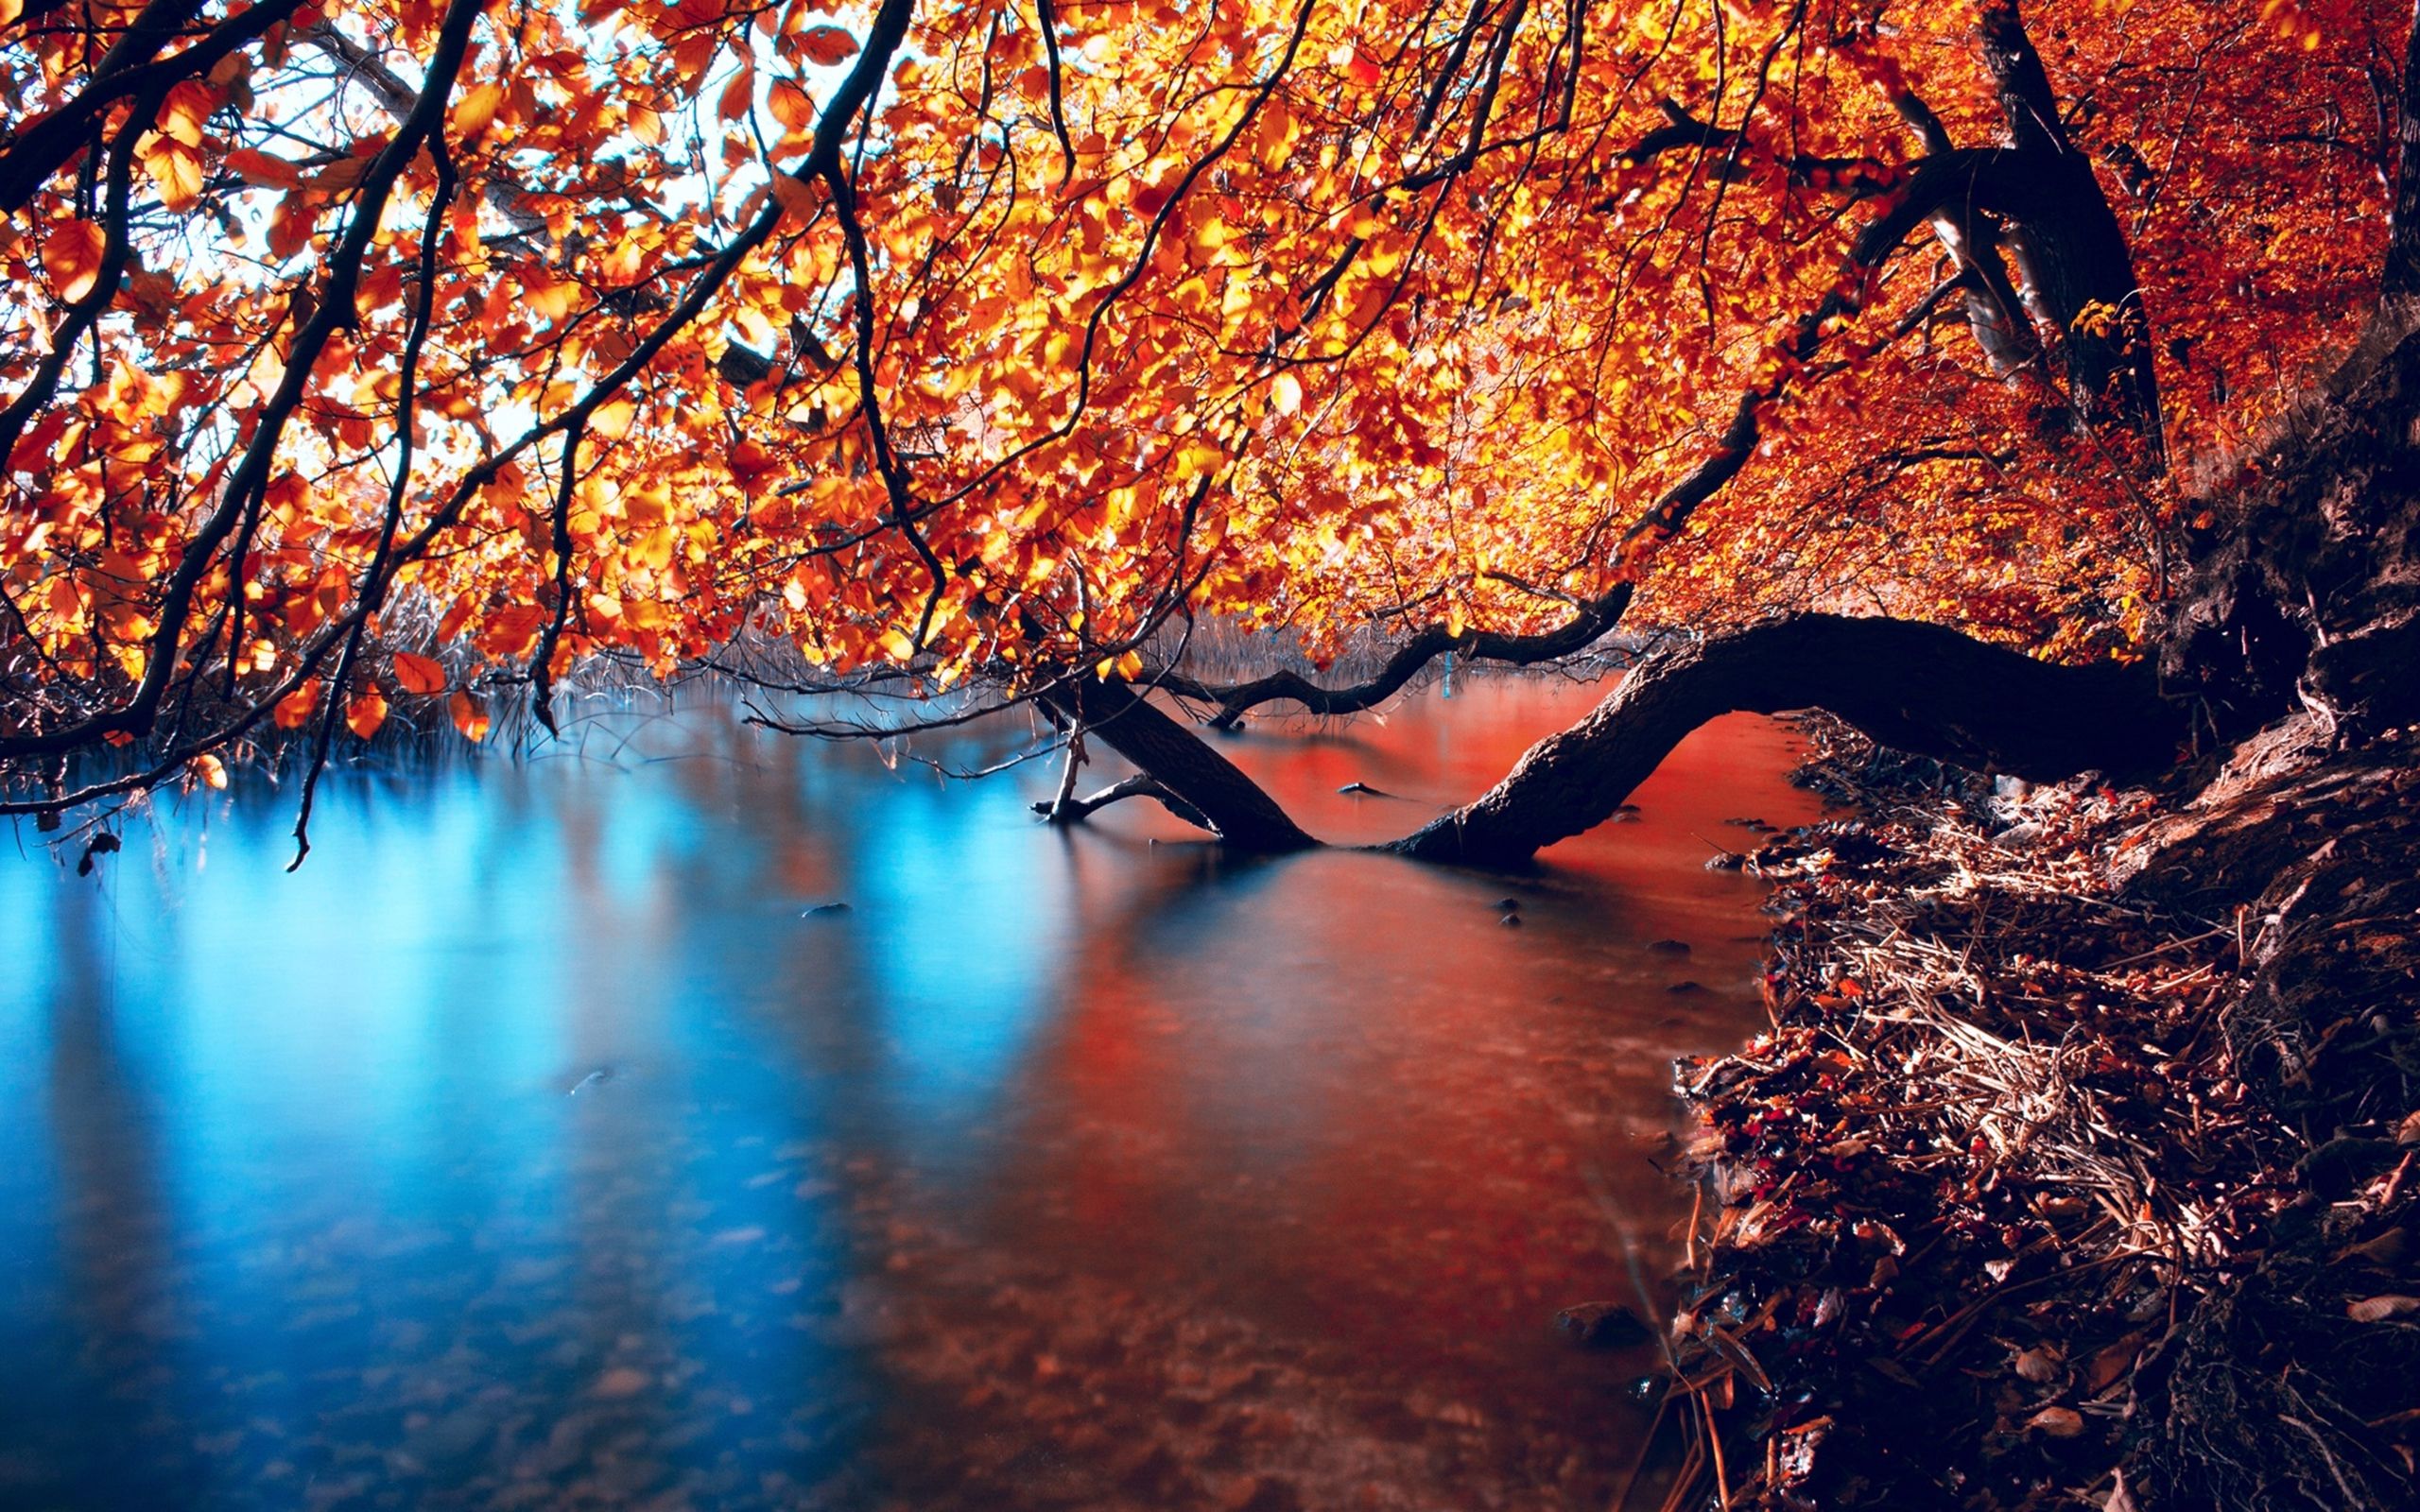 Hd Wallpaper With Branches In Autumn Colors In The Water, Wallpaper13.com